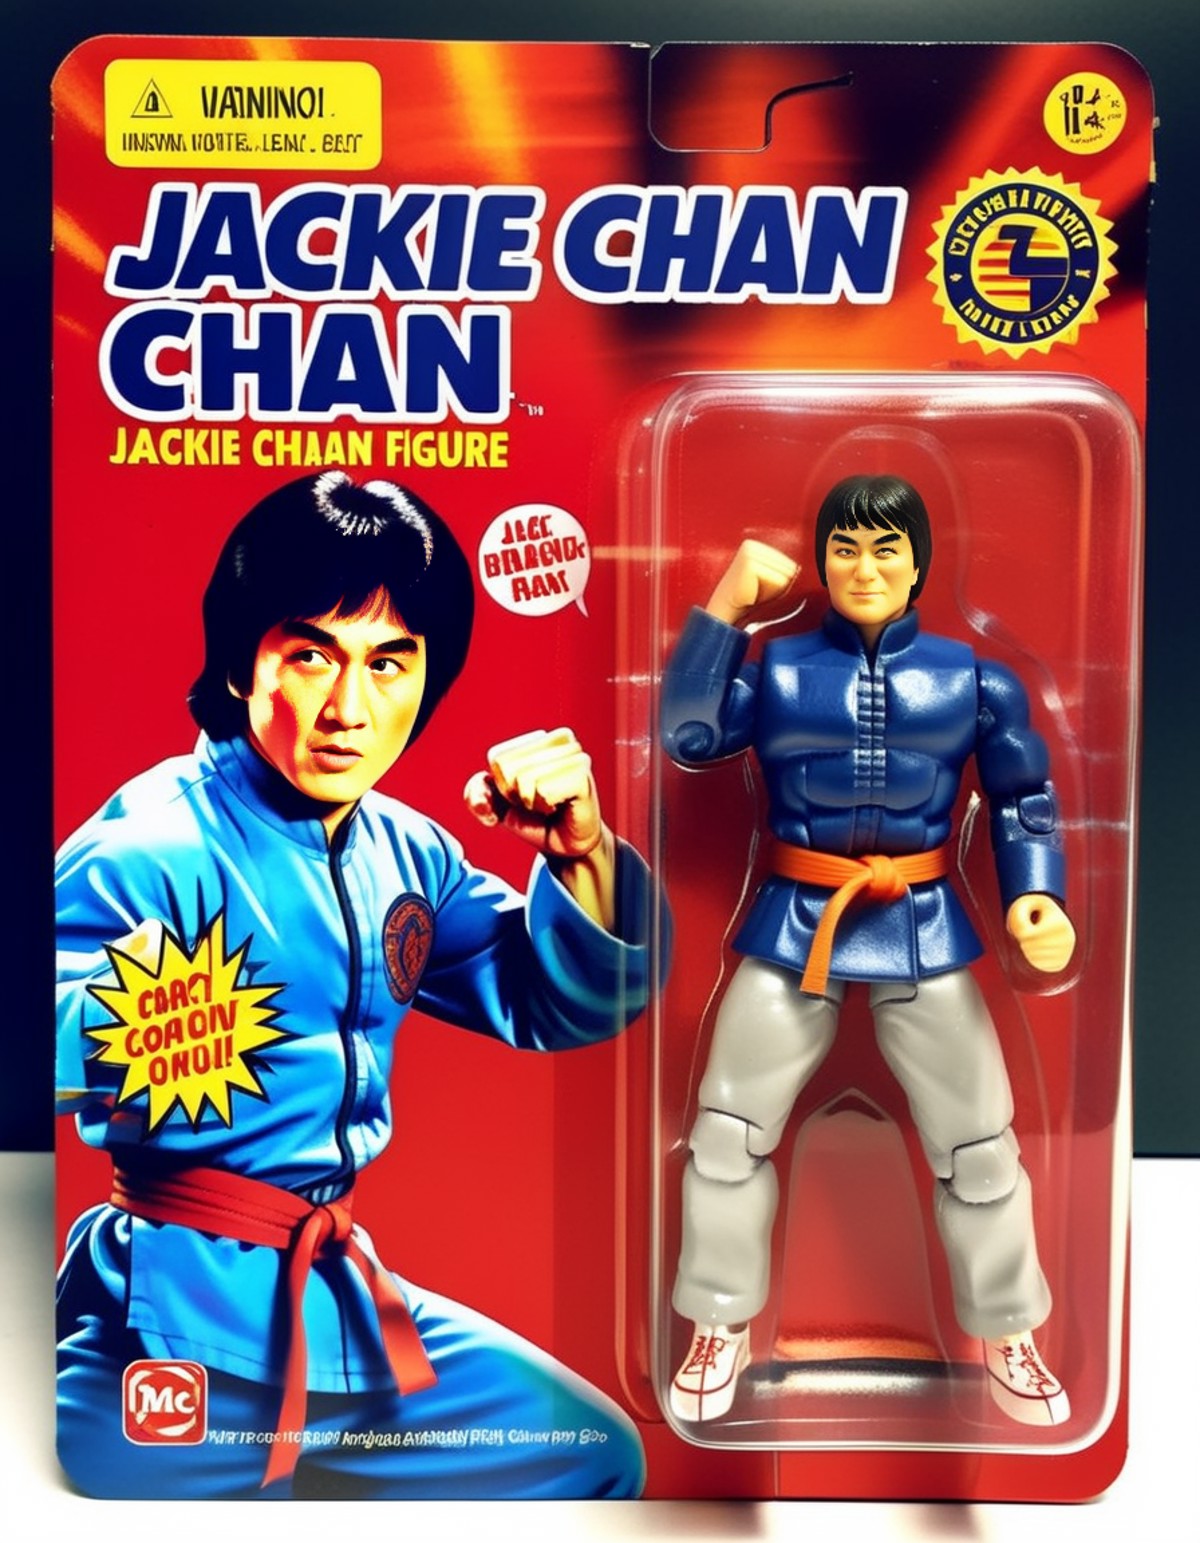 A hyper-realistic, photograph-like image of a Jackie Chan action figure toy, packaged in a vibrant box. The packaging feat...